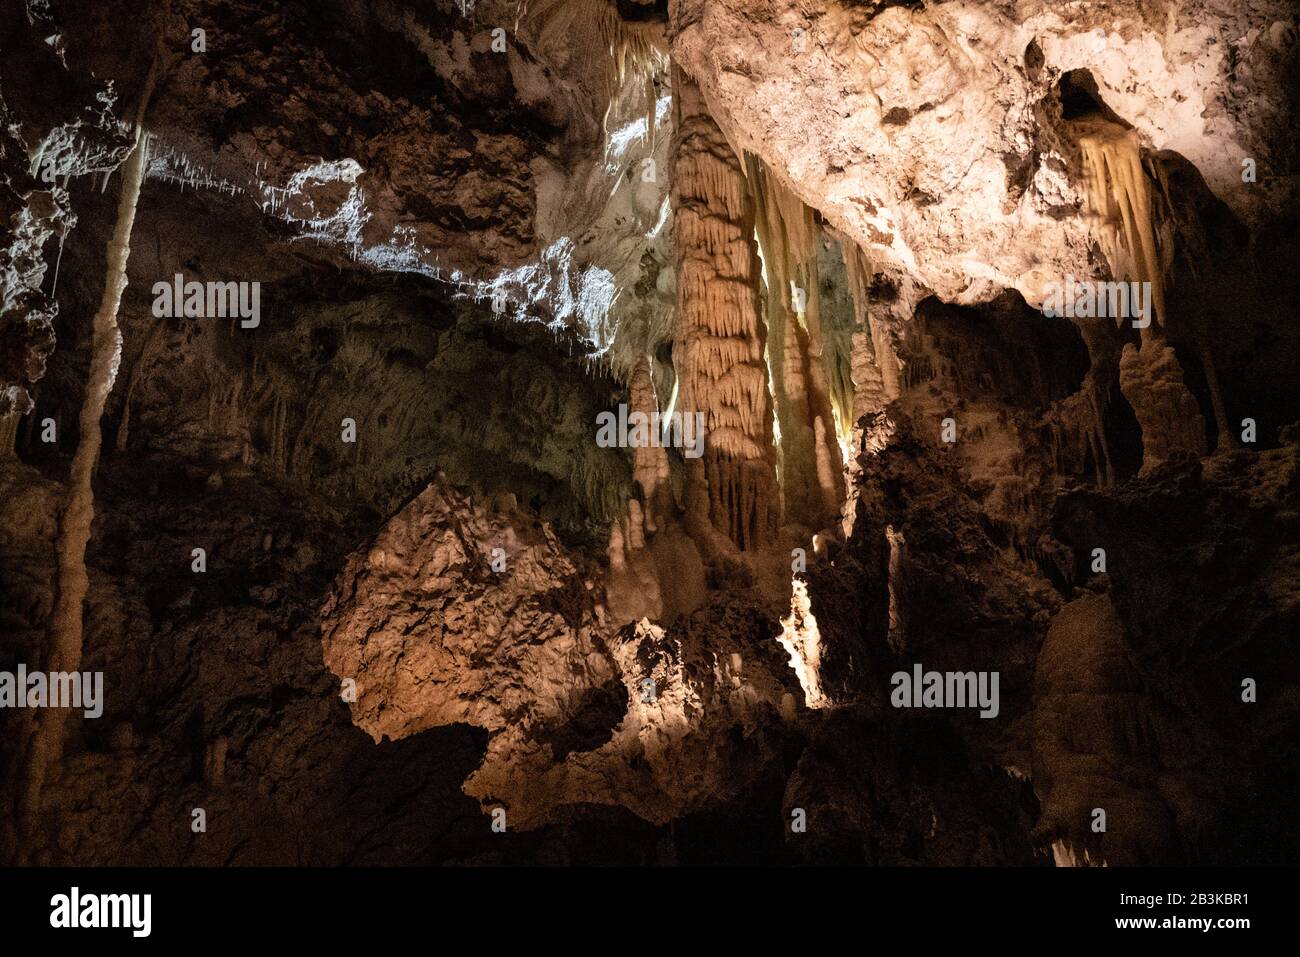 Italy, Marche, Genga, the natural show of Frasassi Caves with sharp stalactites and stalagmites Stock Photo